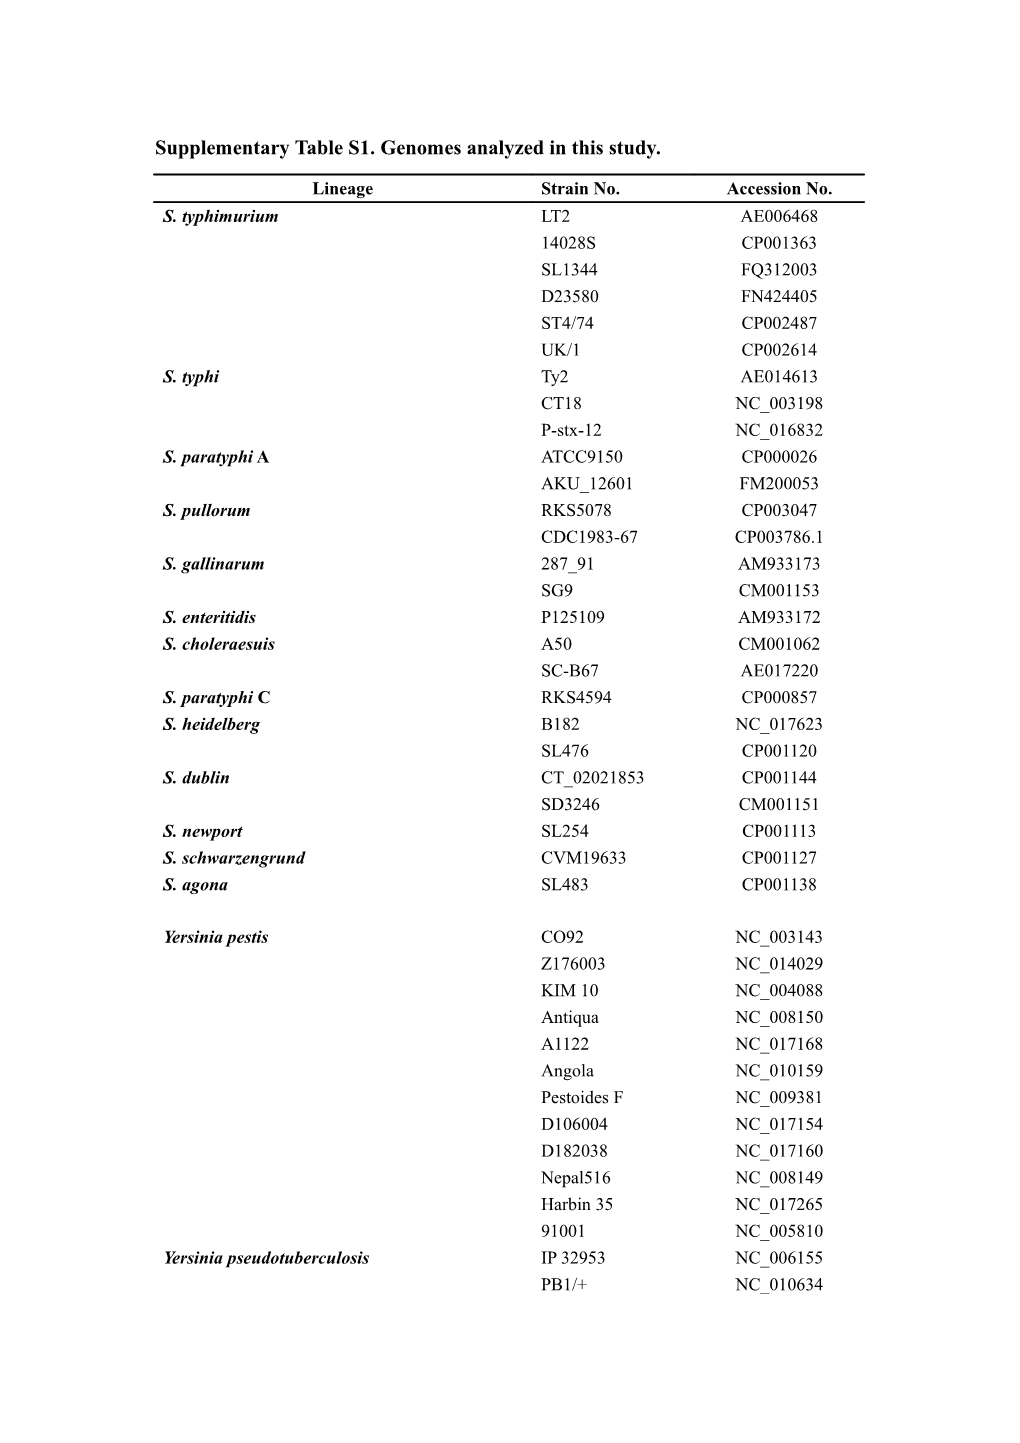 Supplementary Table S1. Genomes Analyzed in This Study